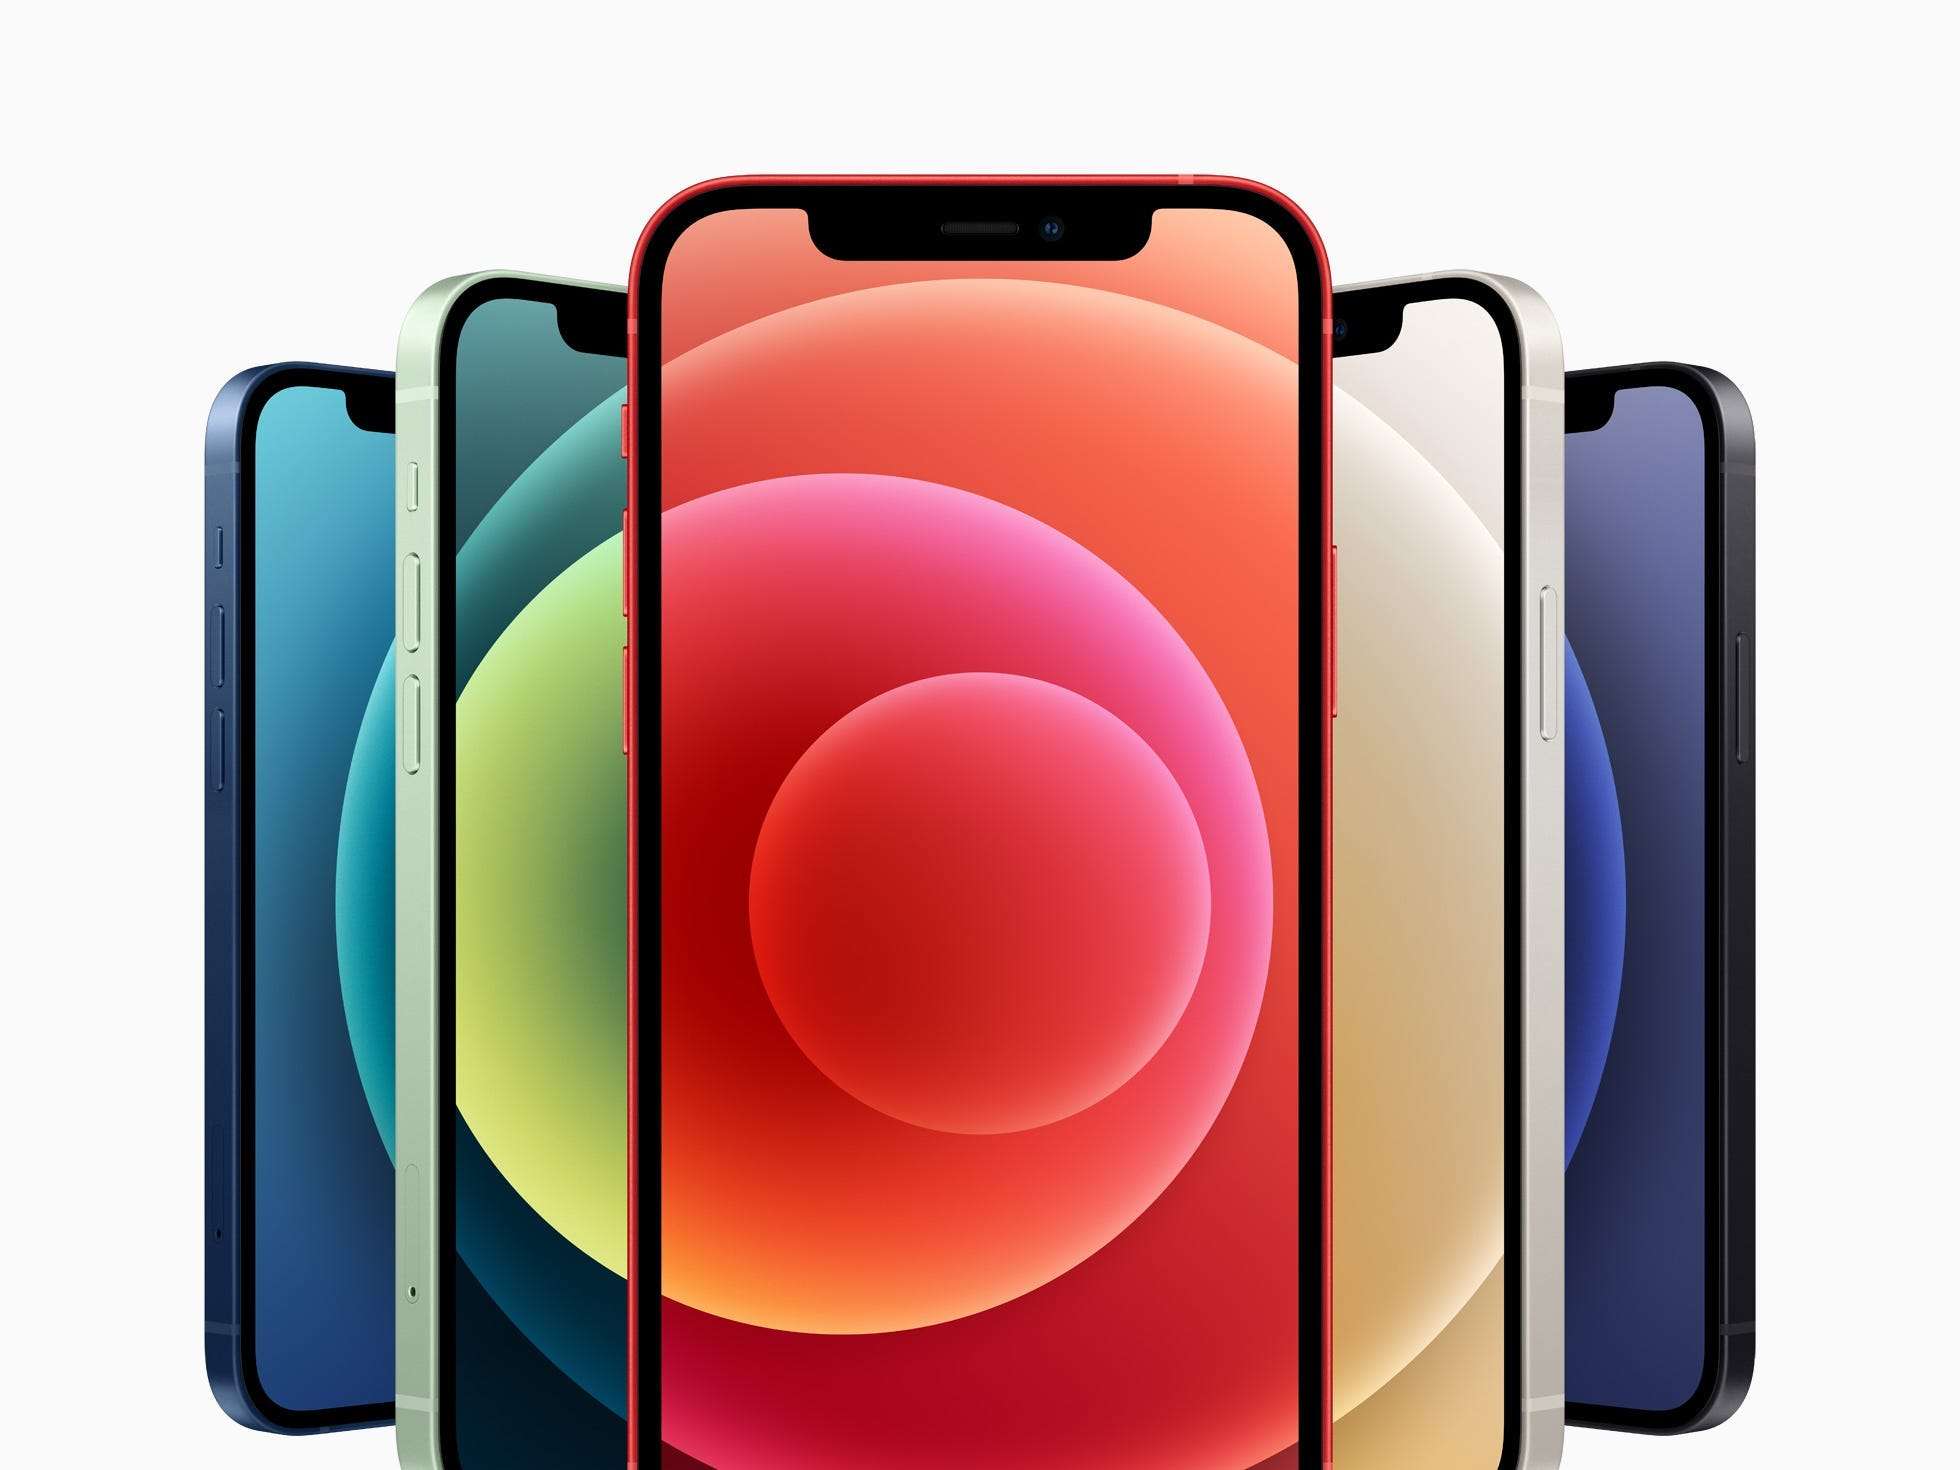 iphone 12 colors available